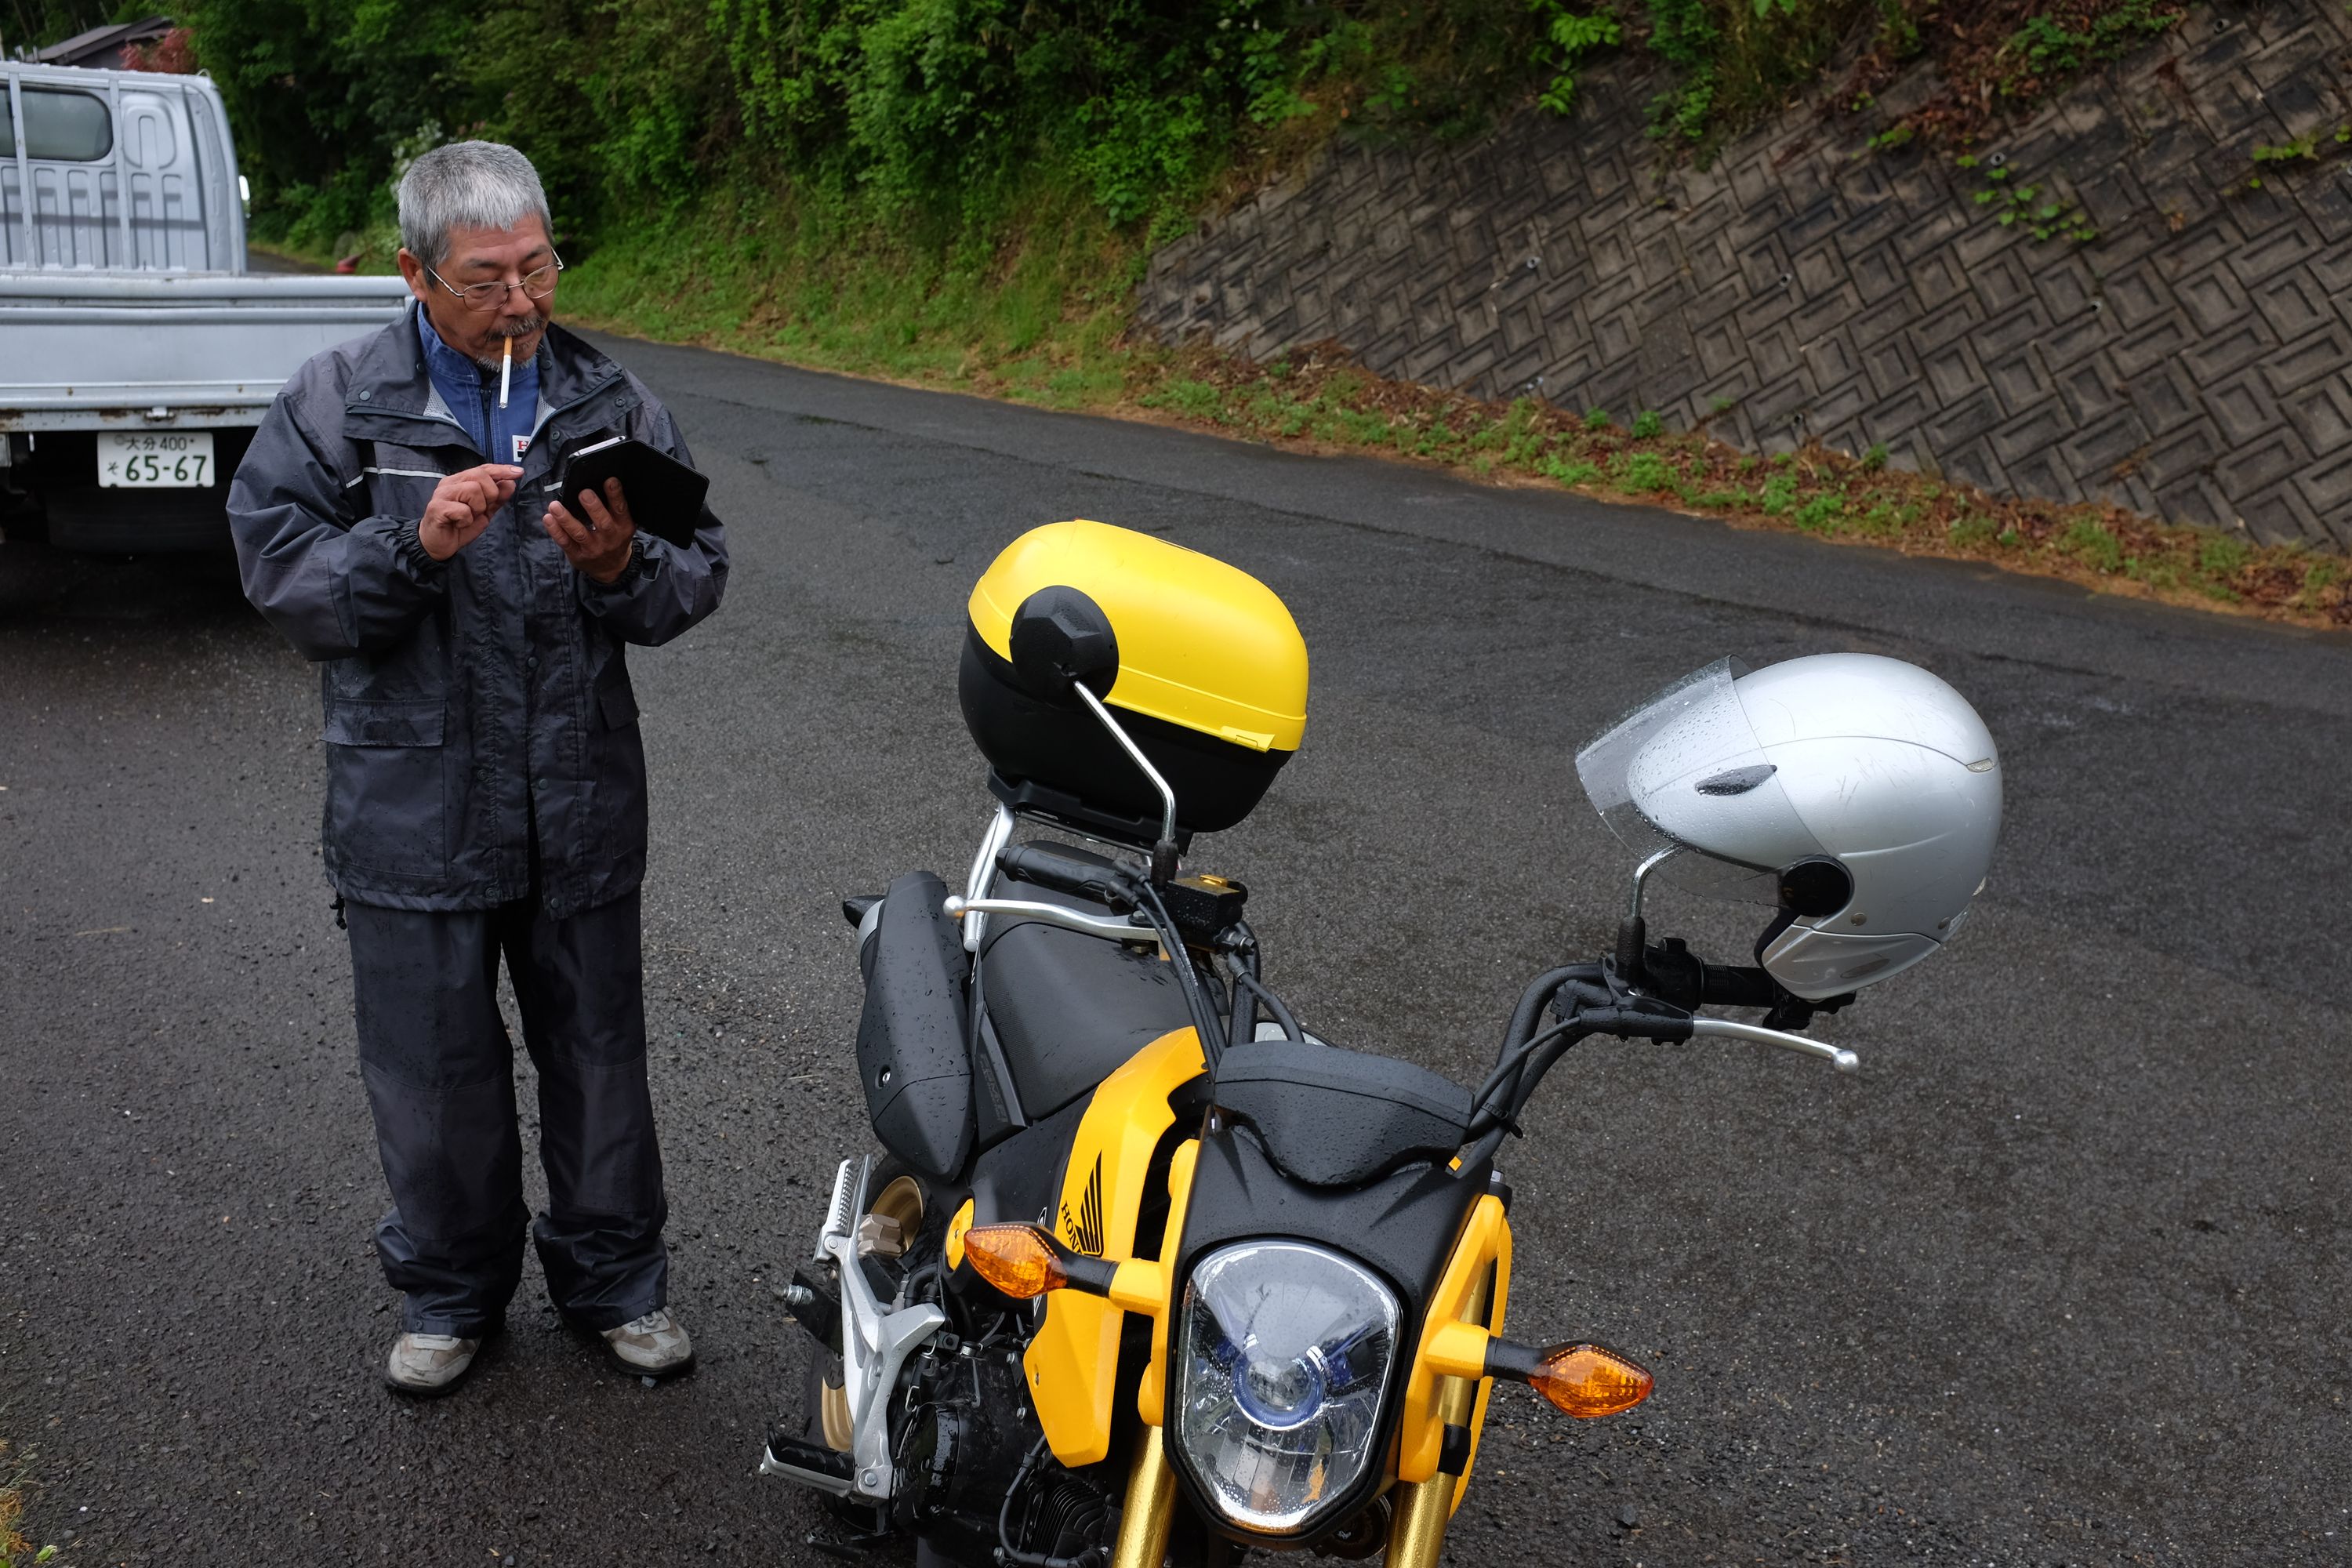 A Japanese man in mechanic’s overalls stands by his yellow motorcycle in the rain, smoking a cigarette and typing into his phone.